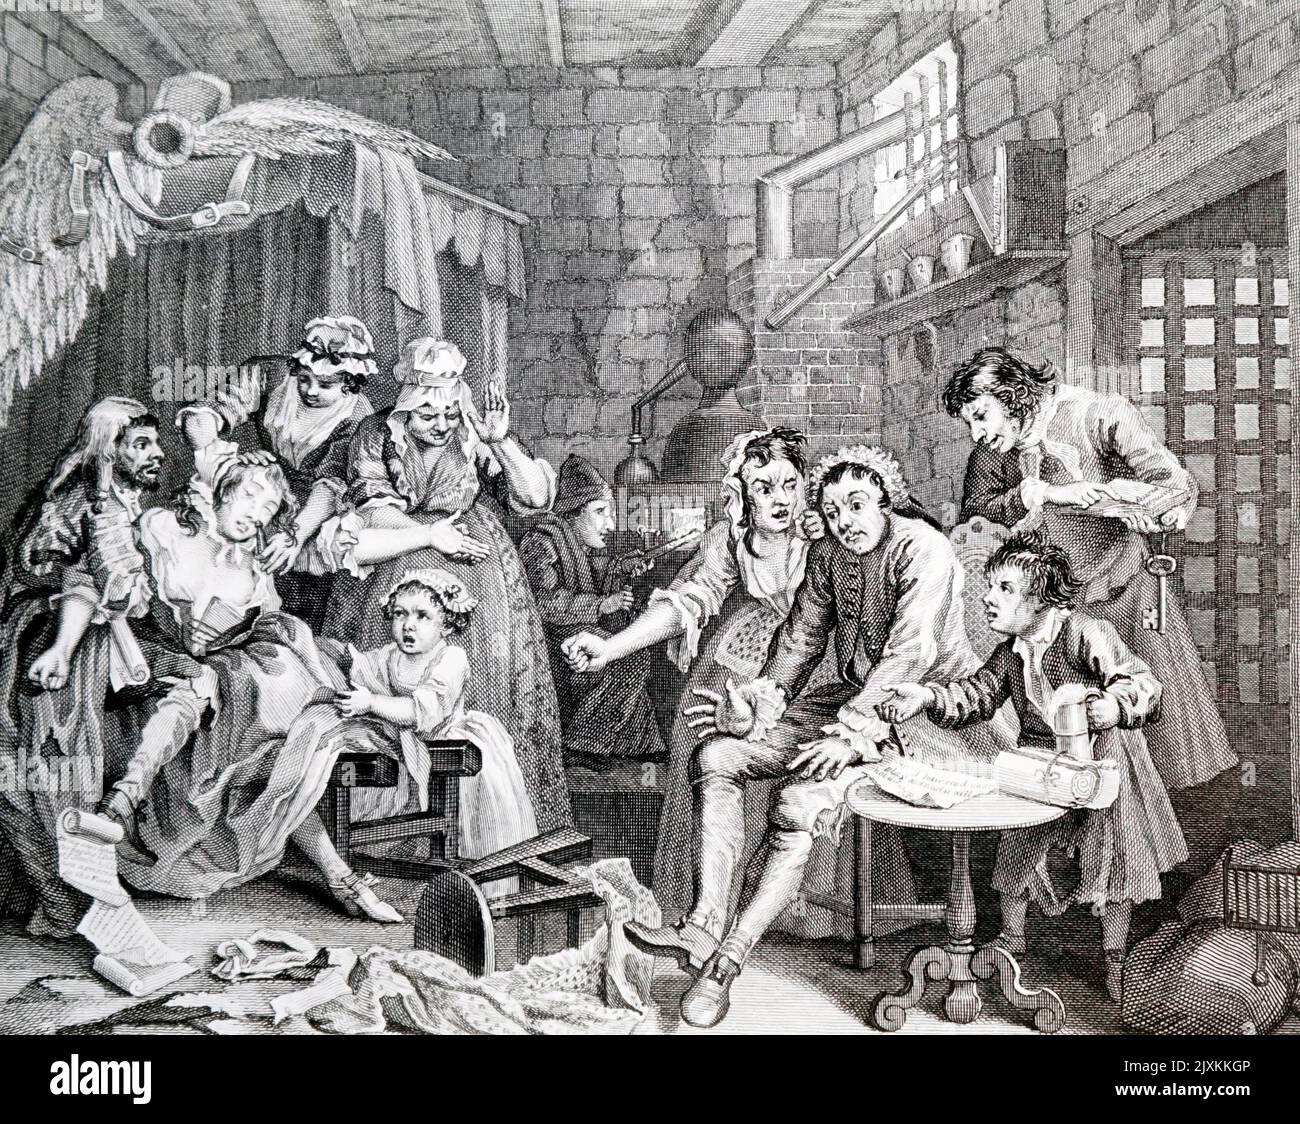 Engraving titled 'The Rake's Progress' by William Hogarth (1697-1764) depicting the Rake in the Debtor's Prison. Dated 18th Century Stock Photo